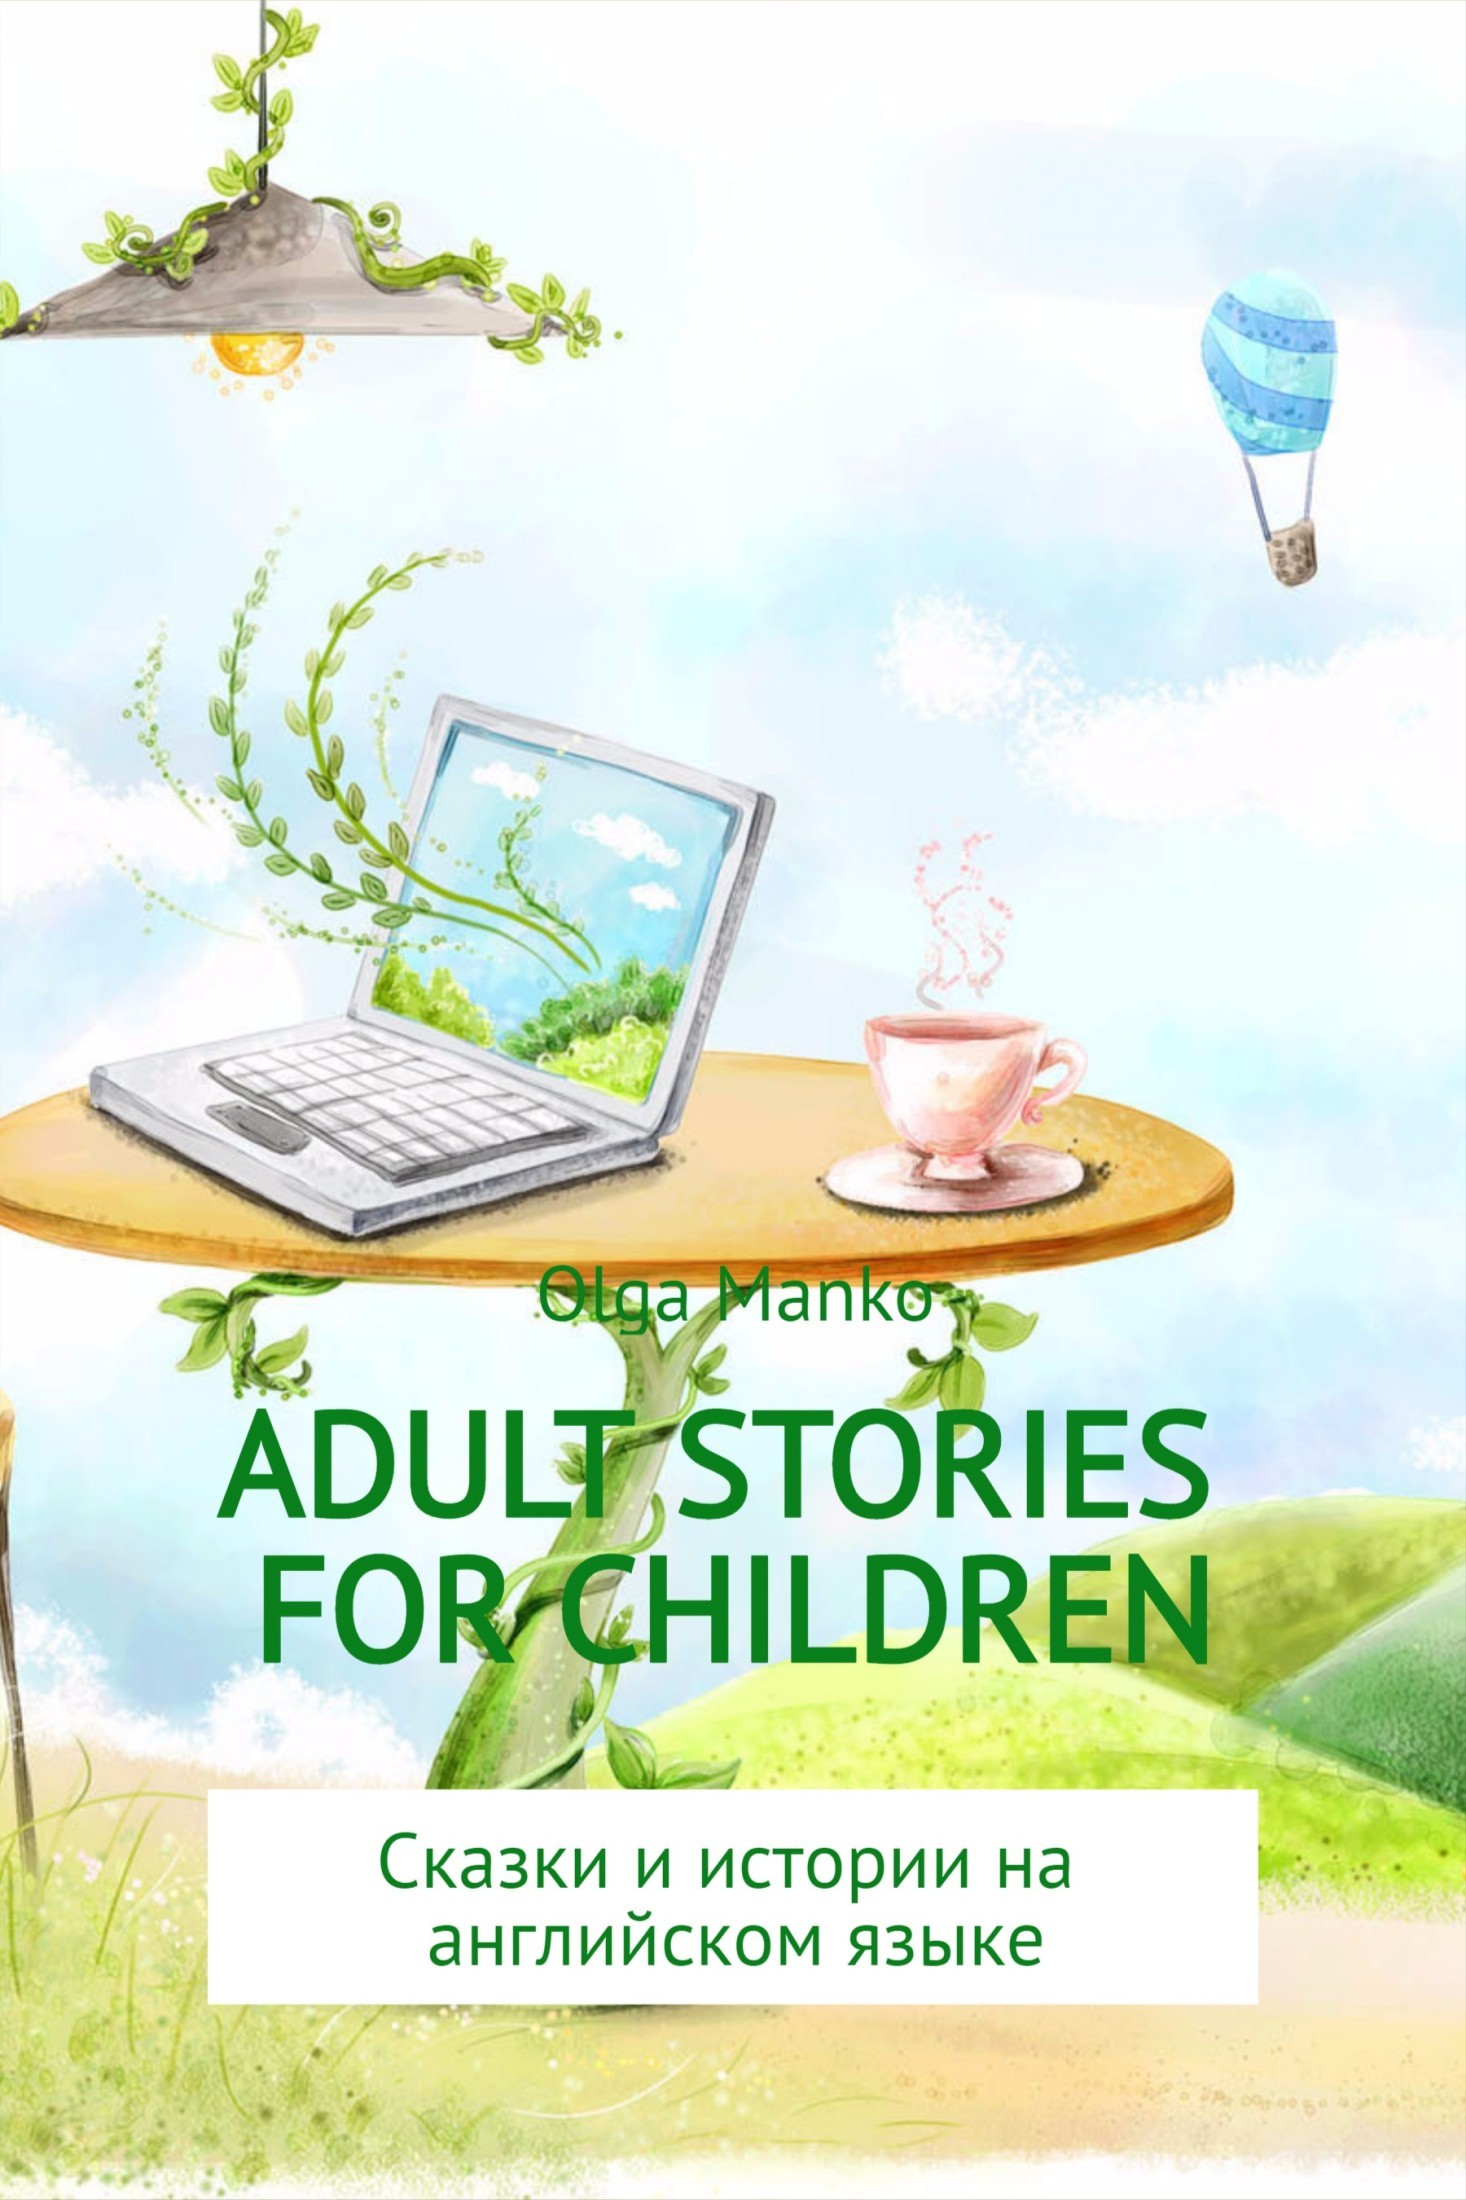 Adult stories for children